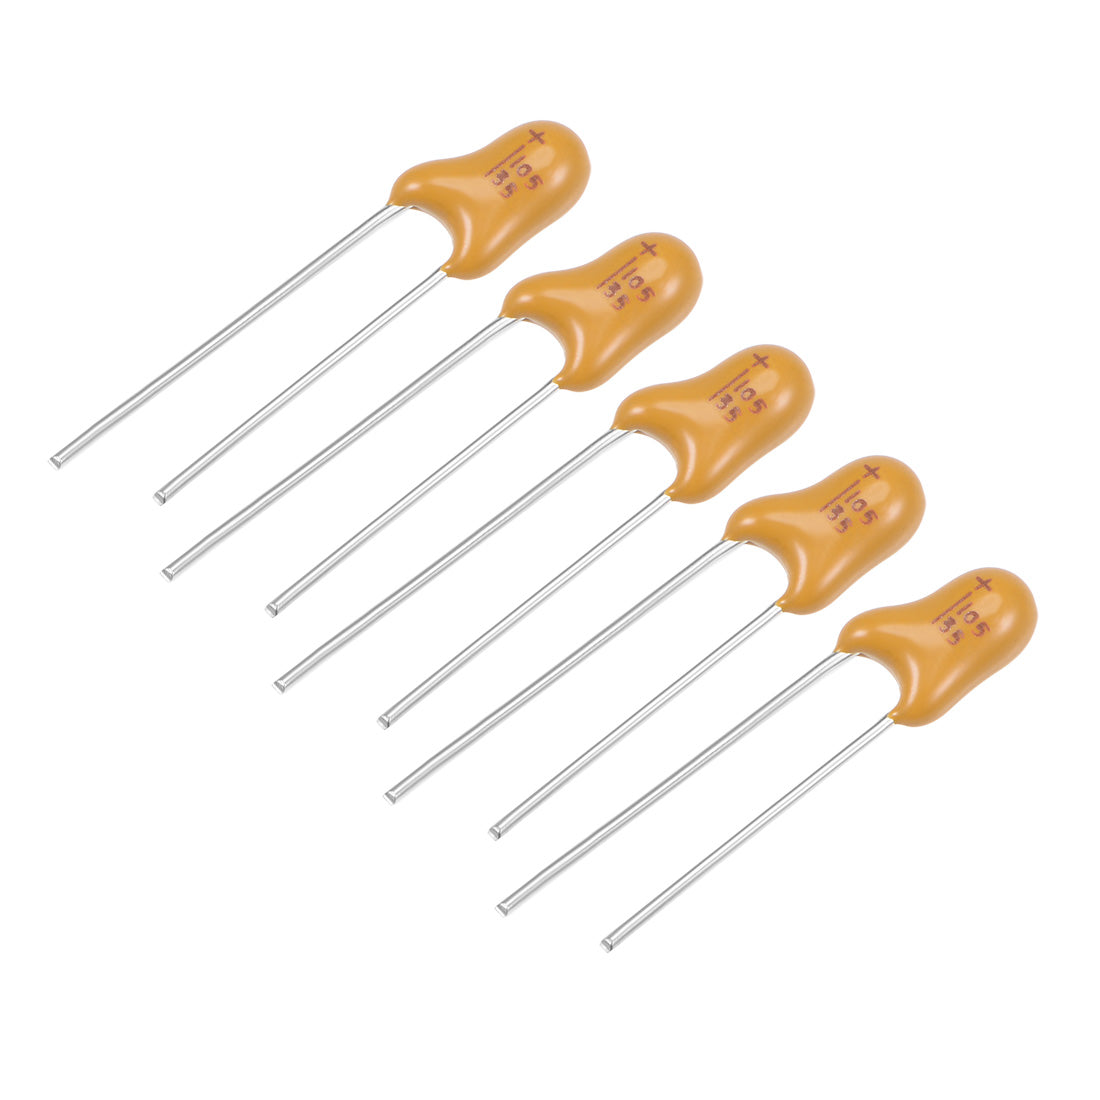 uxcell Uxcell 1uF Tantalum Capacitor, 35V 2 Pin Yellow Radial Electrolytic Capacitor Dipped Tantalum Bead Capacitors 5pcs